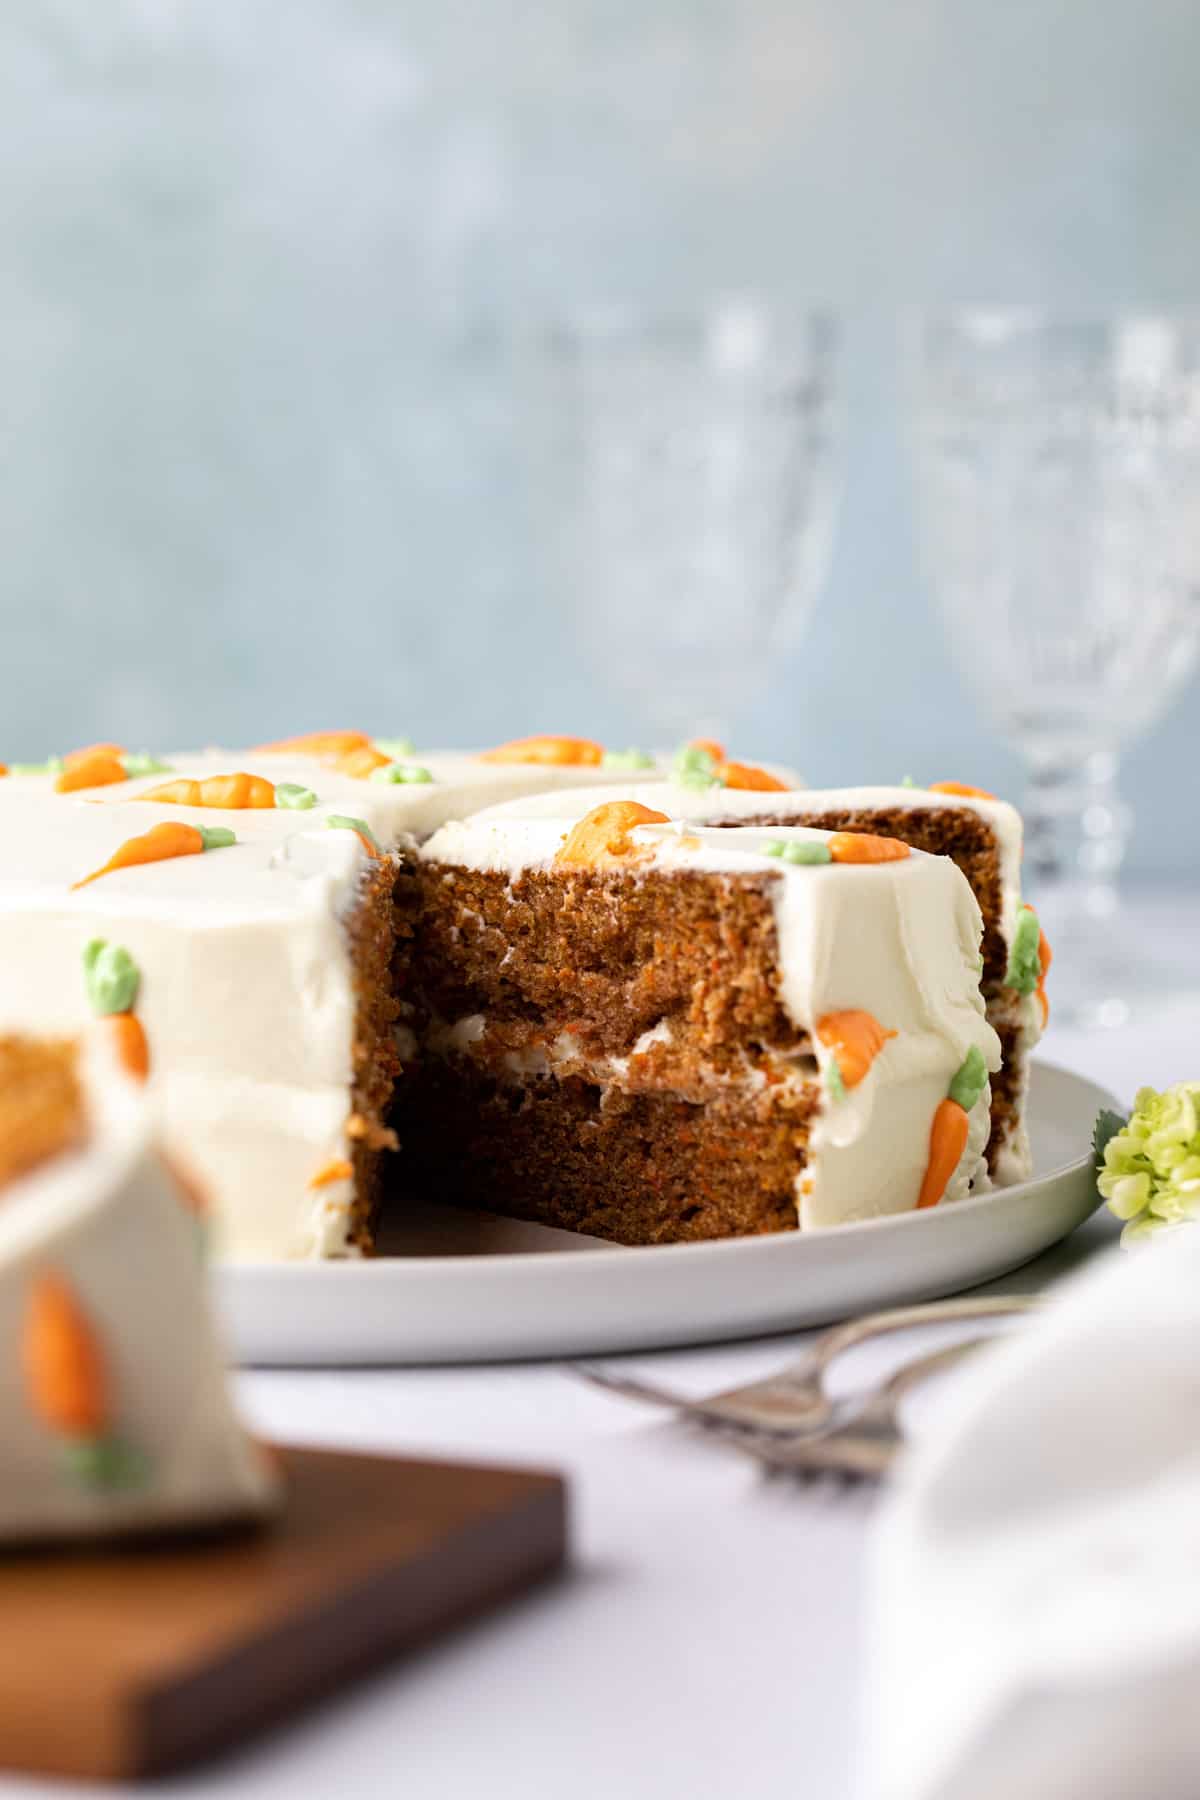 Irresistible Carrot Cake: Make Your Birthday Healthy!